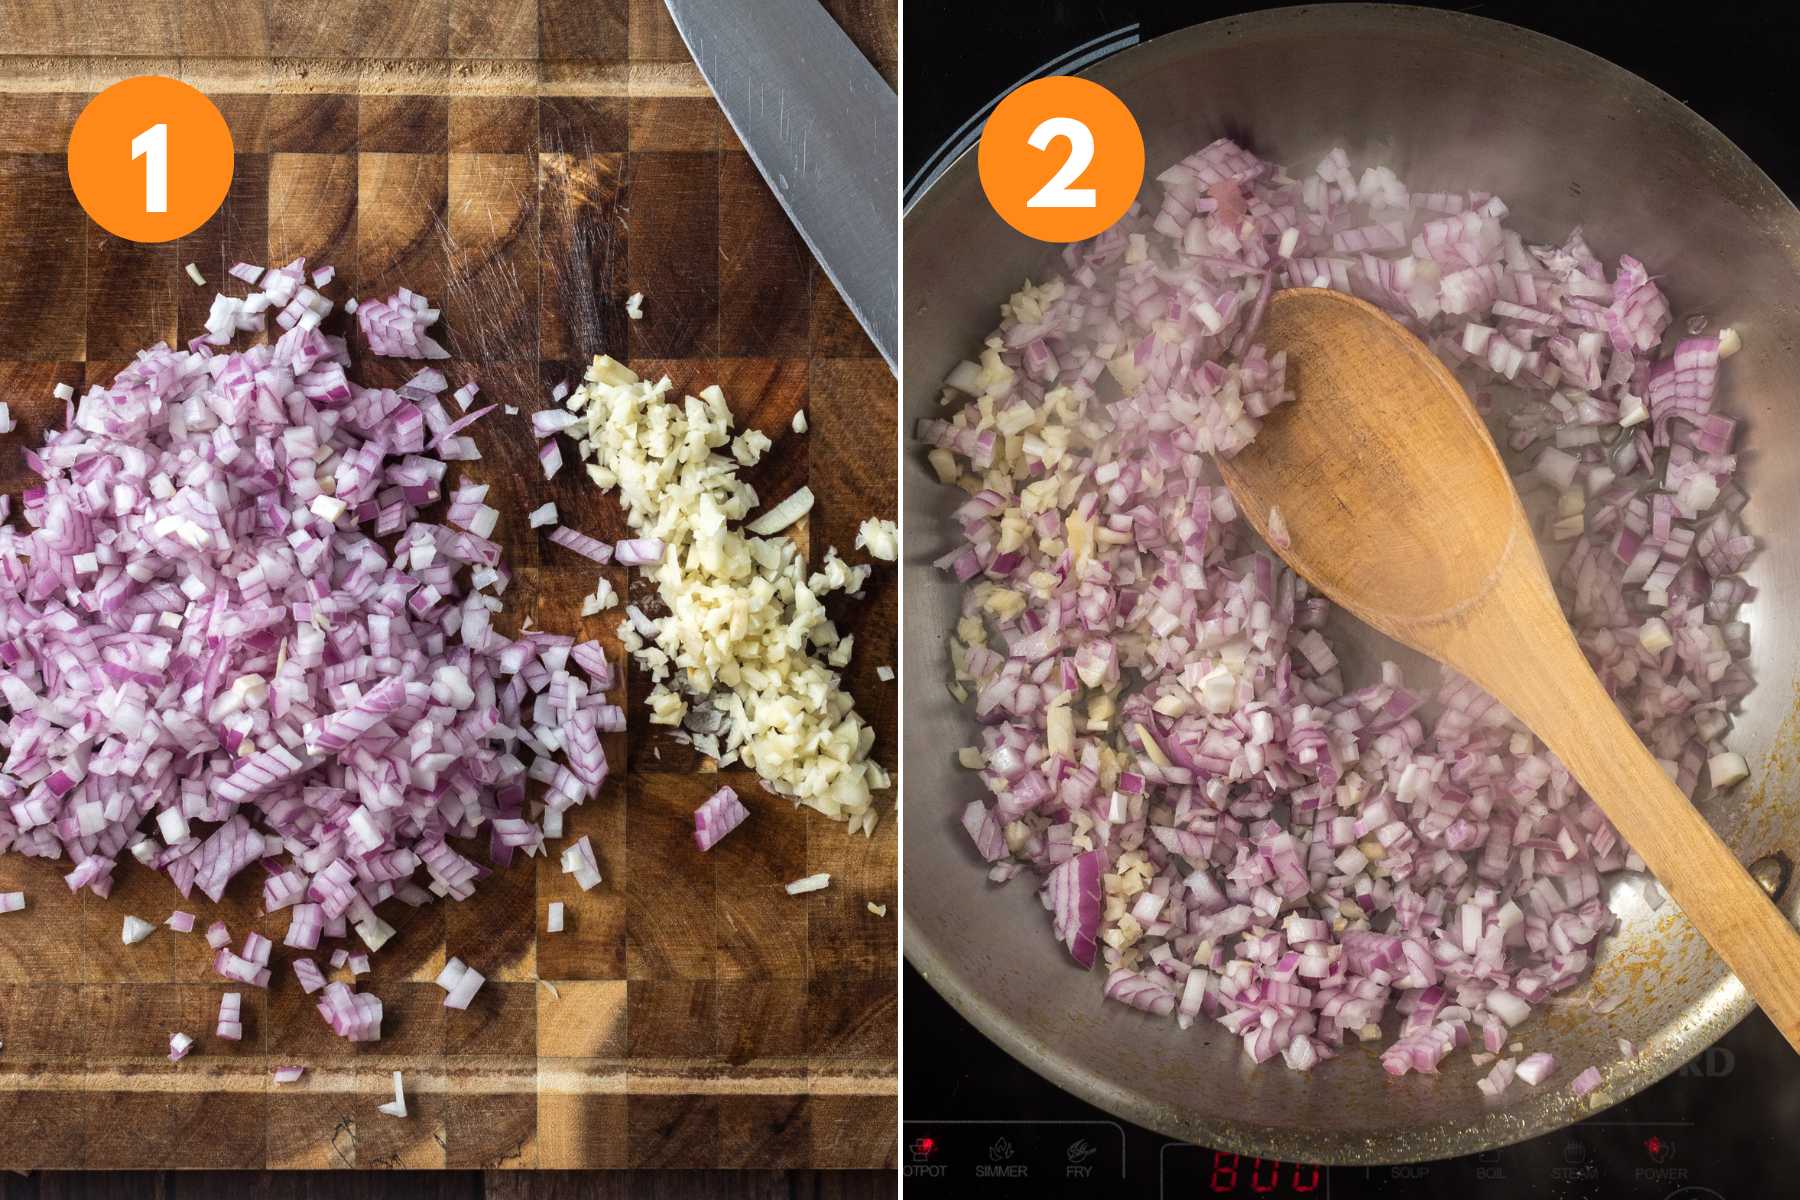 Red onions and garlic chopped into small pieces and in a pan cooking.